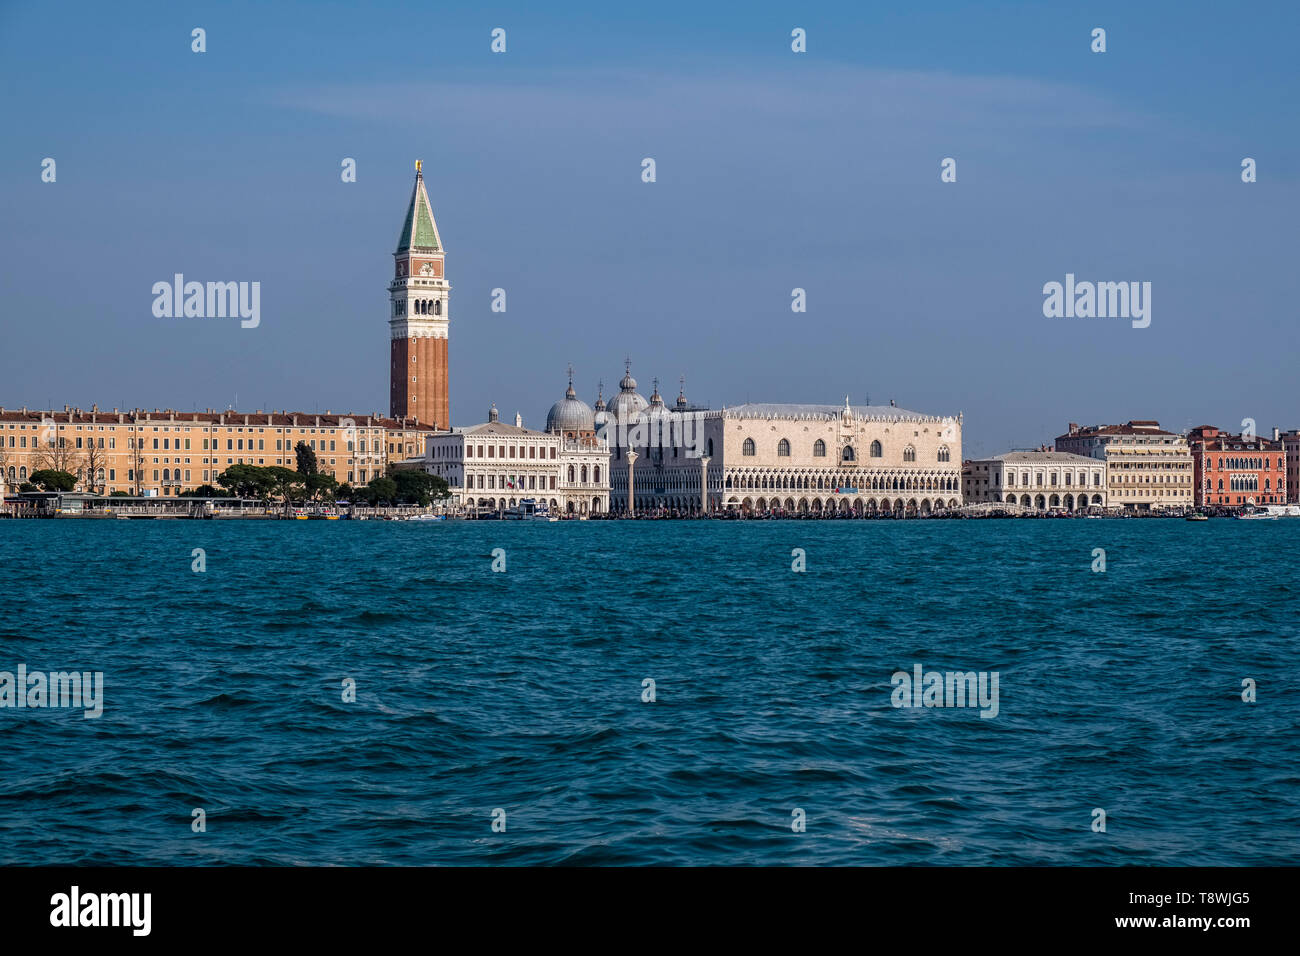 View across the Grand Canal, Canal Grande, St Mark's Campanile, Campanile di San Marco and Doge's Palace, Palazzo Ducale, in the distance Stock Photo